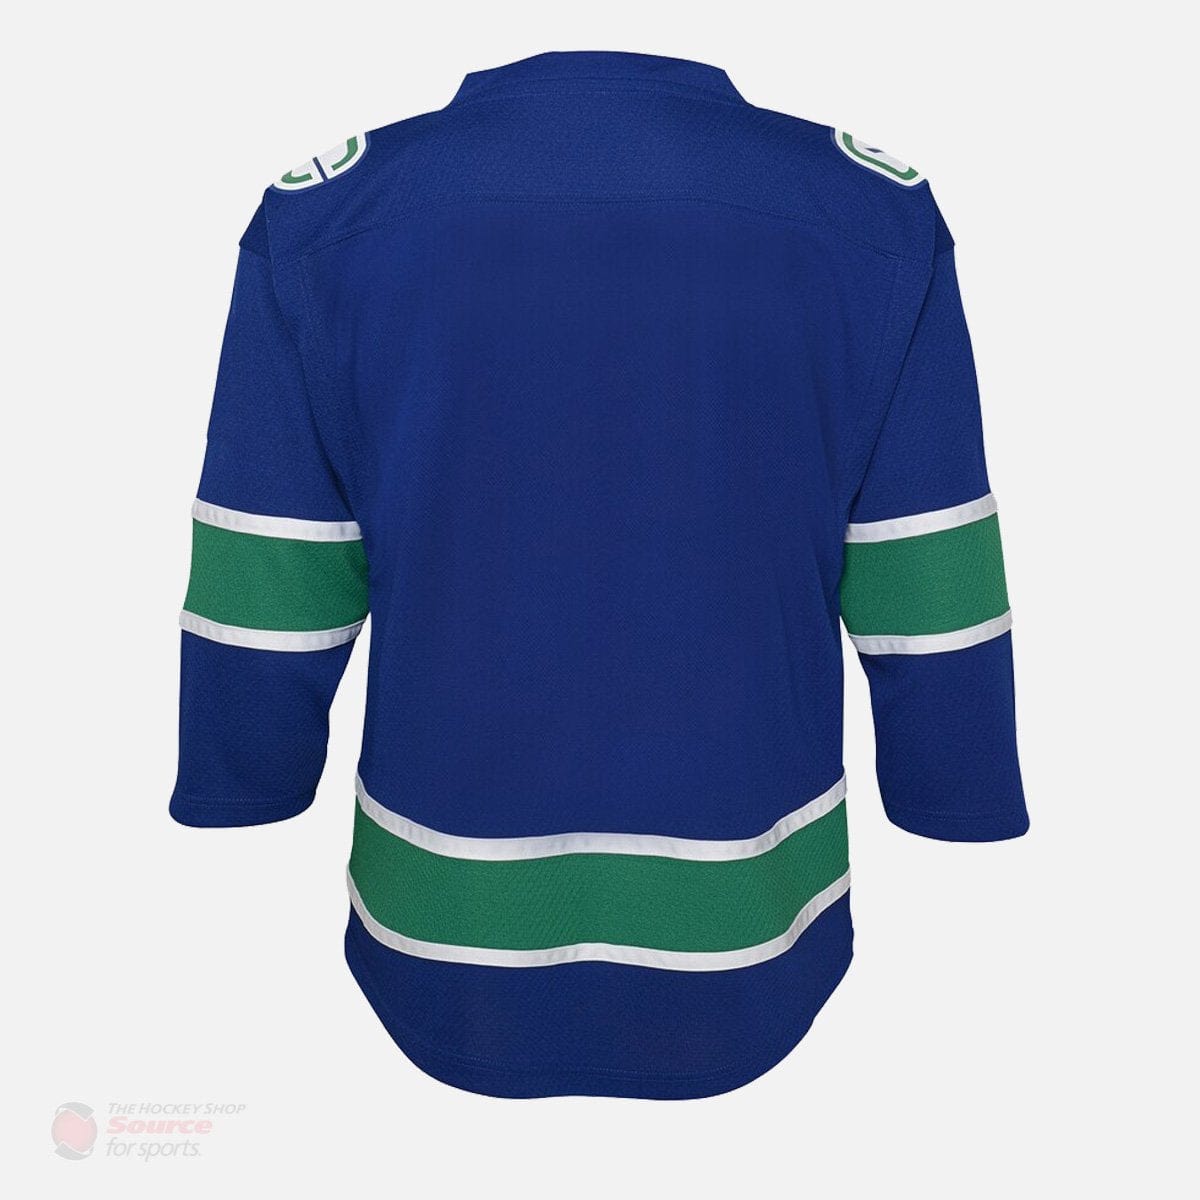 Vancouver Canucks Home Outer Stuff Replica Toddler Jersey